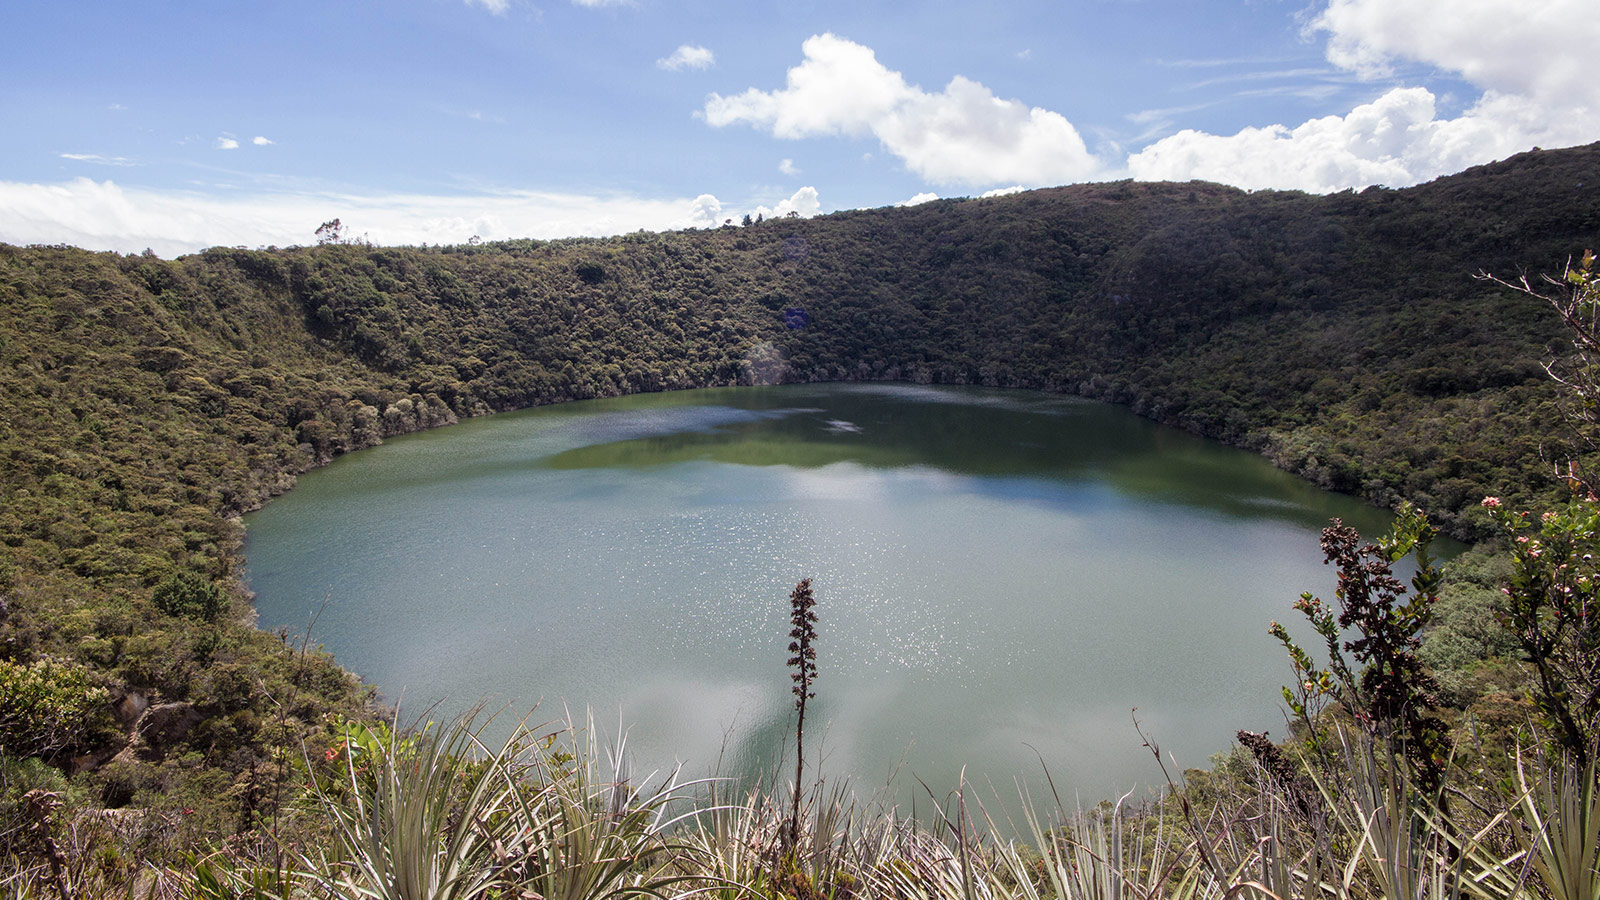 A crater lake surrounded by jungle that is believed to be part of the Lost City of Gold in Guatavita Colombia with Kids